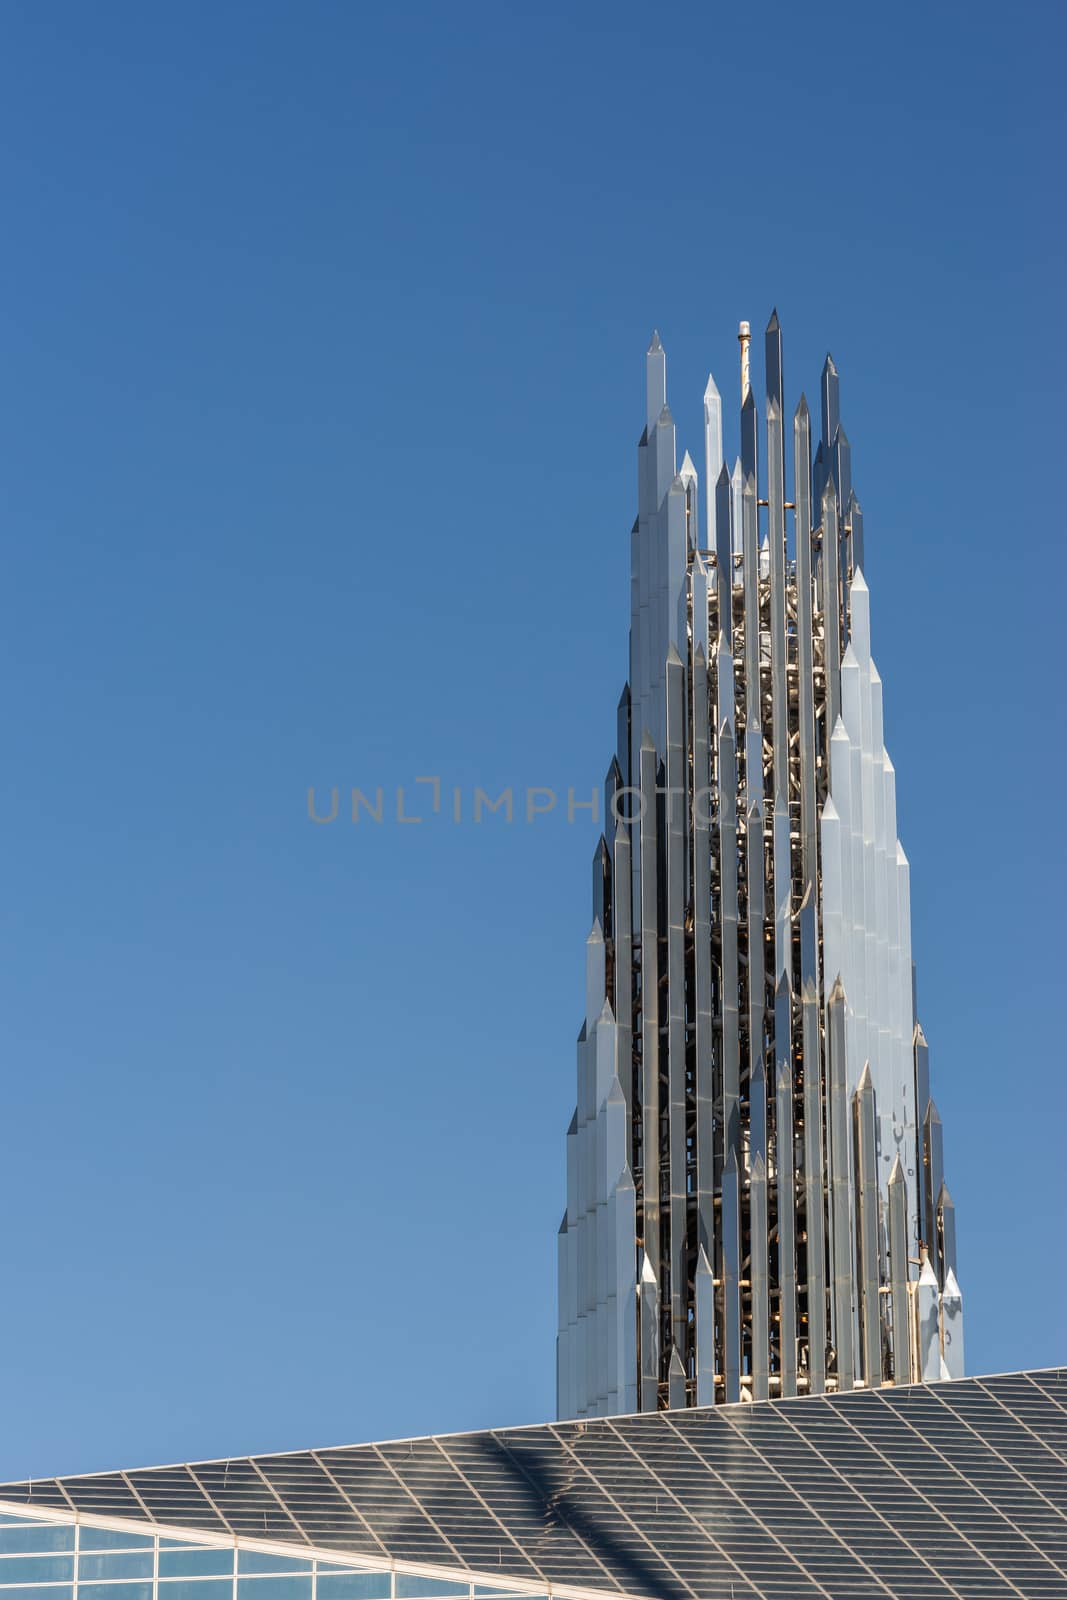 Garden Grove, California, USA - December 13, 2018: Crystal Christ Cathedral. Closeup of Crean Tower against blue sky. Roof of cathedral proper in front.